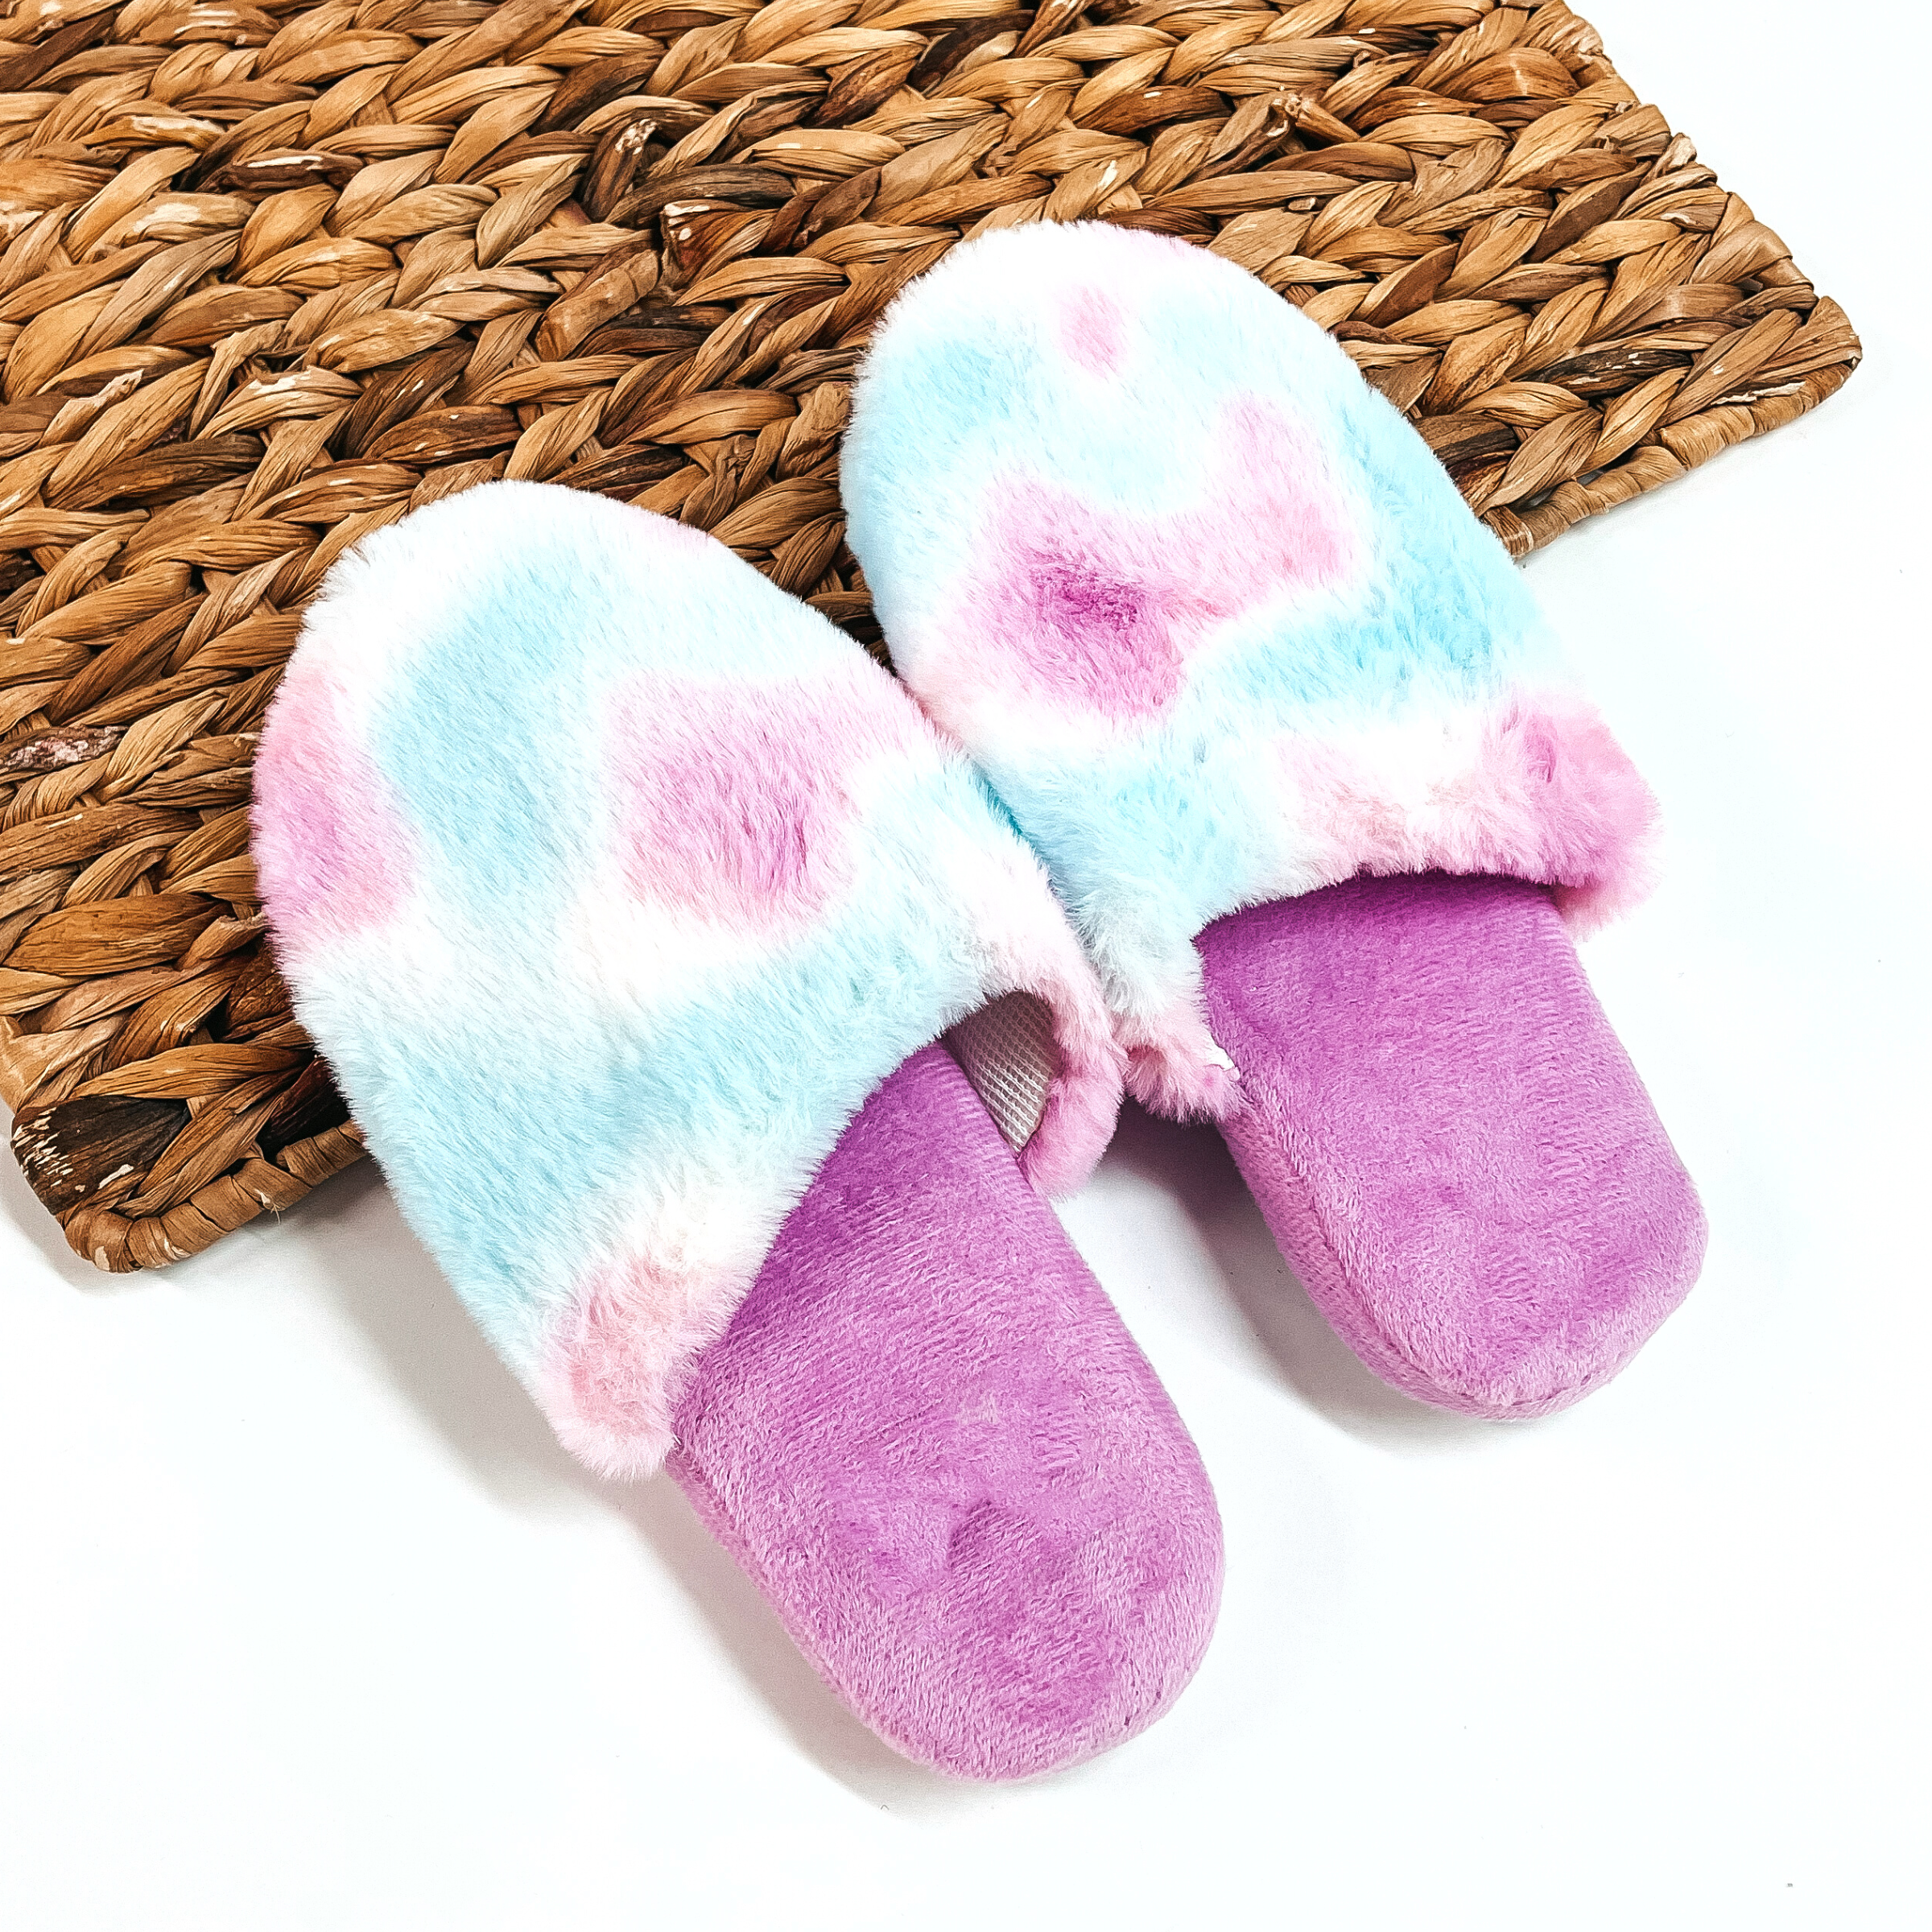 There are a pair of fluffy slip on slippers, the sole is purple and the top  part is tie dye with a purple/white/blue mix. These slippers are placed on a  white background and a brown woven slate.